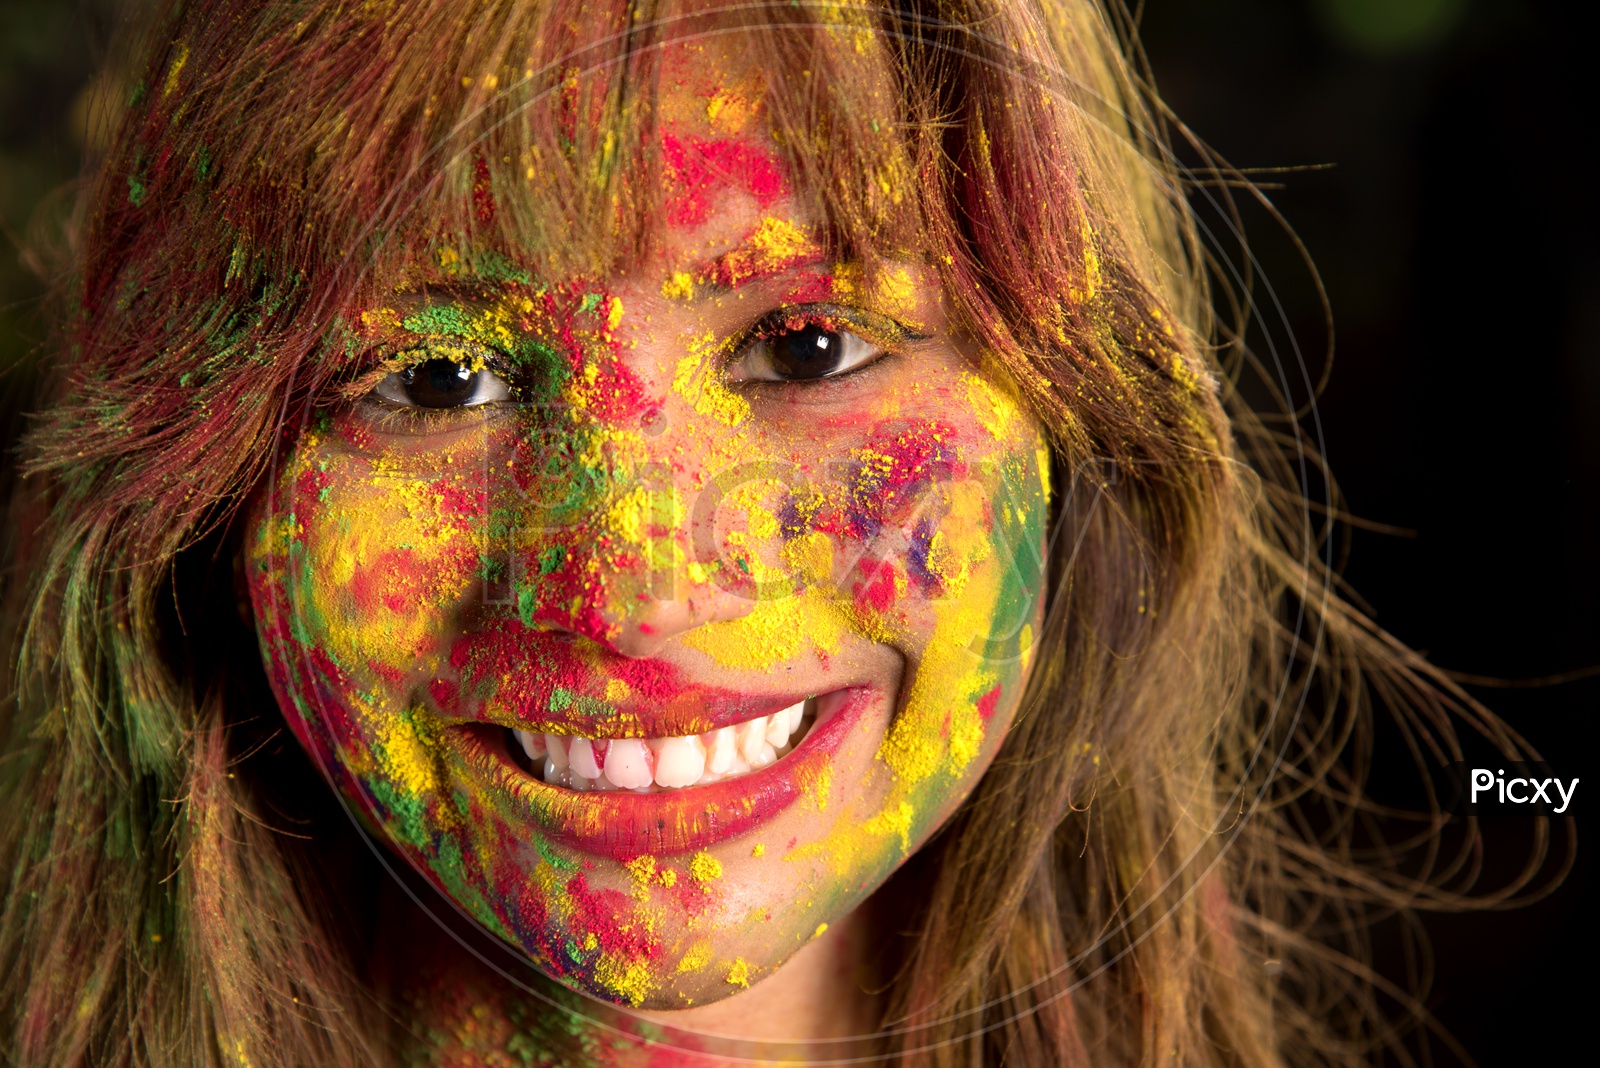 Portrait Of an Happy  Young Indian Girl With Holi Colors On Her and Posing